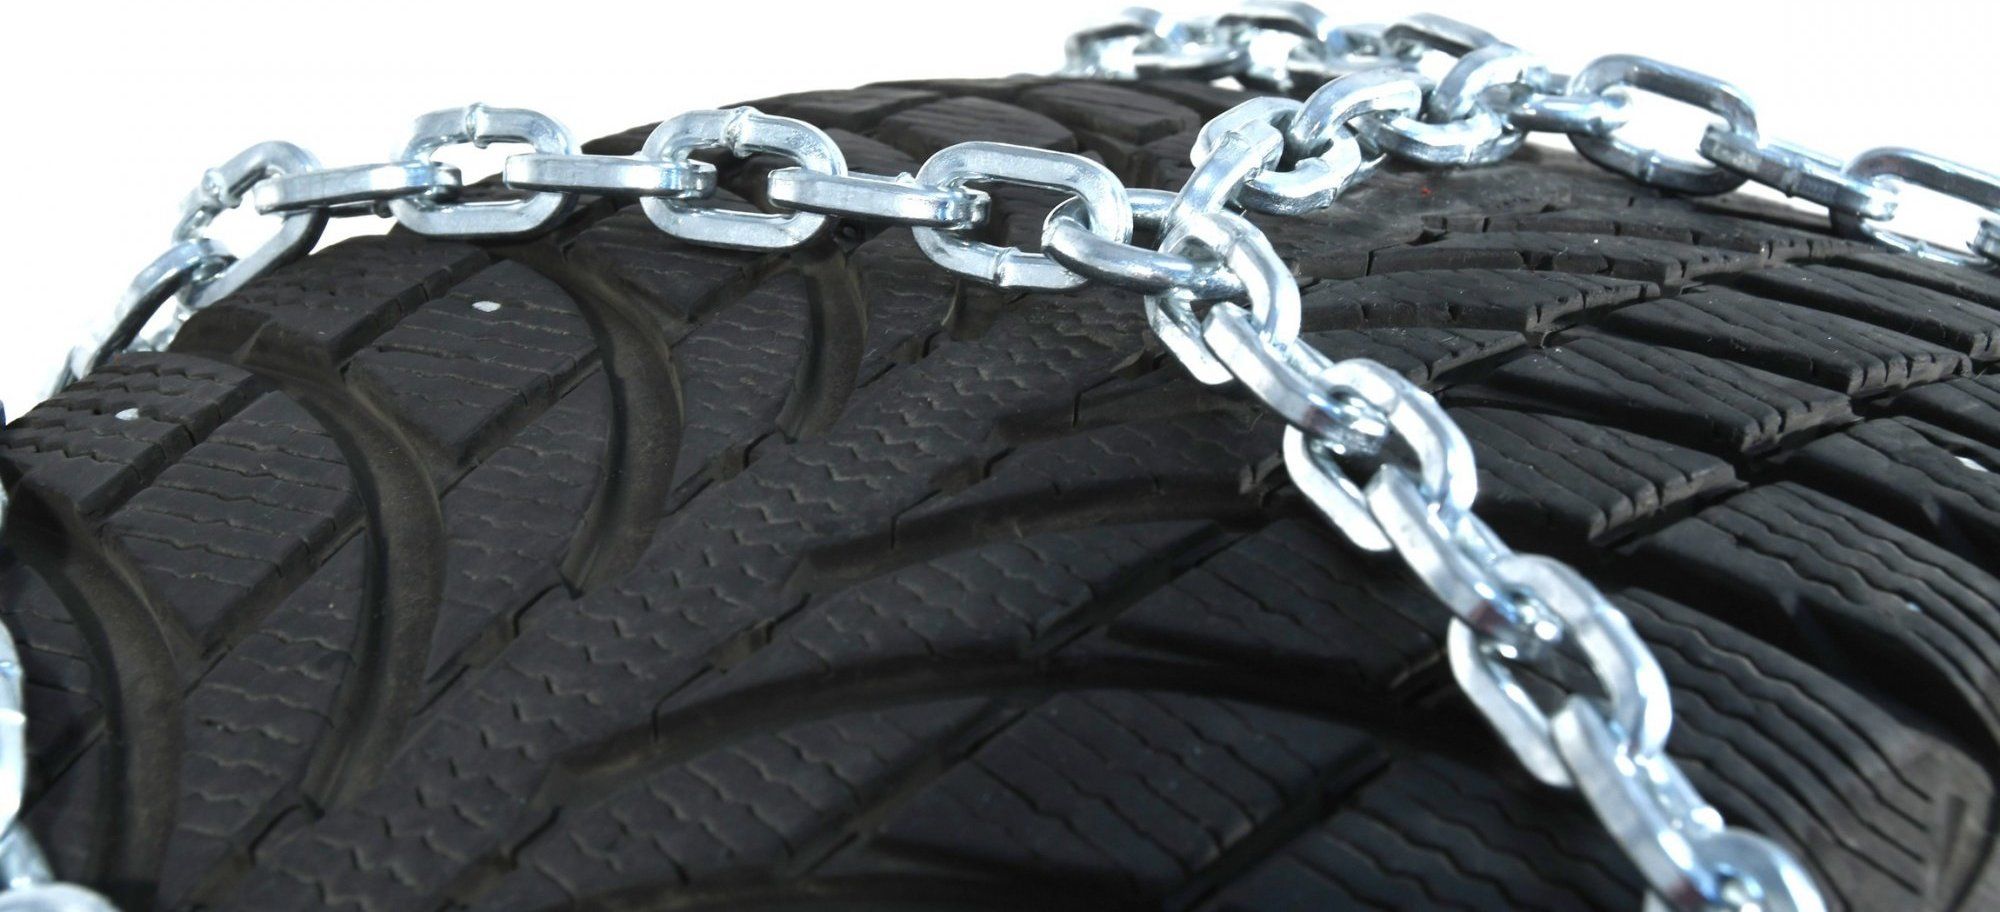 COMPASS Snow Chains 12 mm for Tyres 215/60 R16 ÖNORM, TÜV Tested